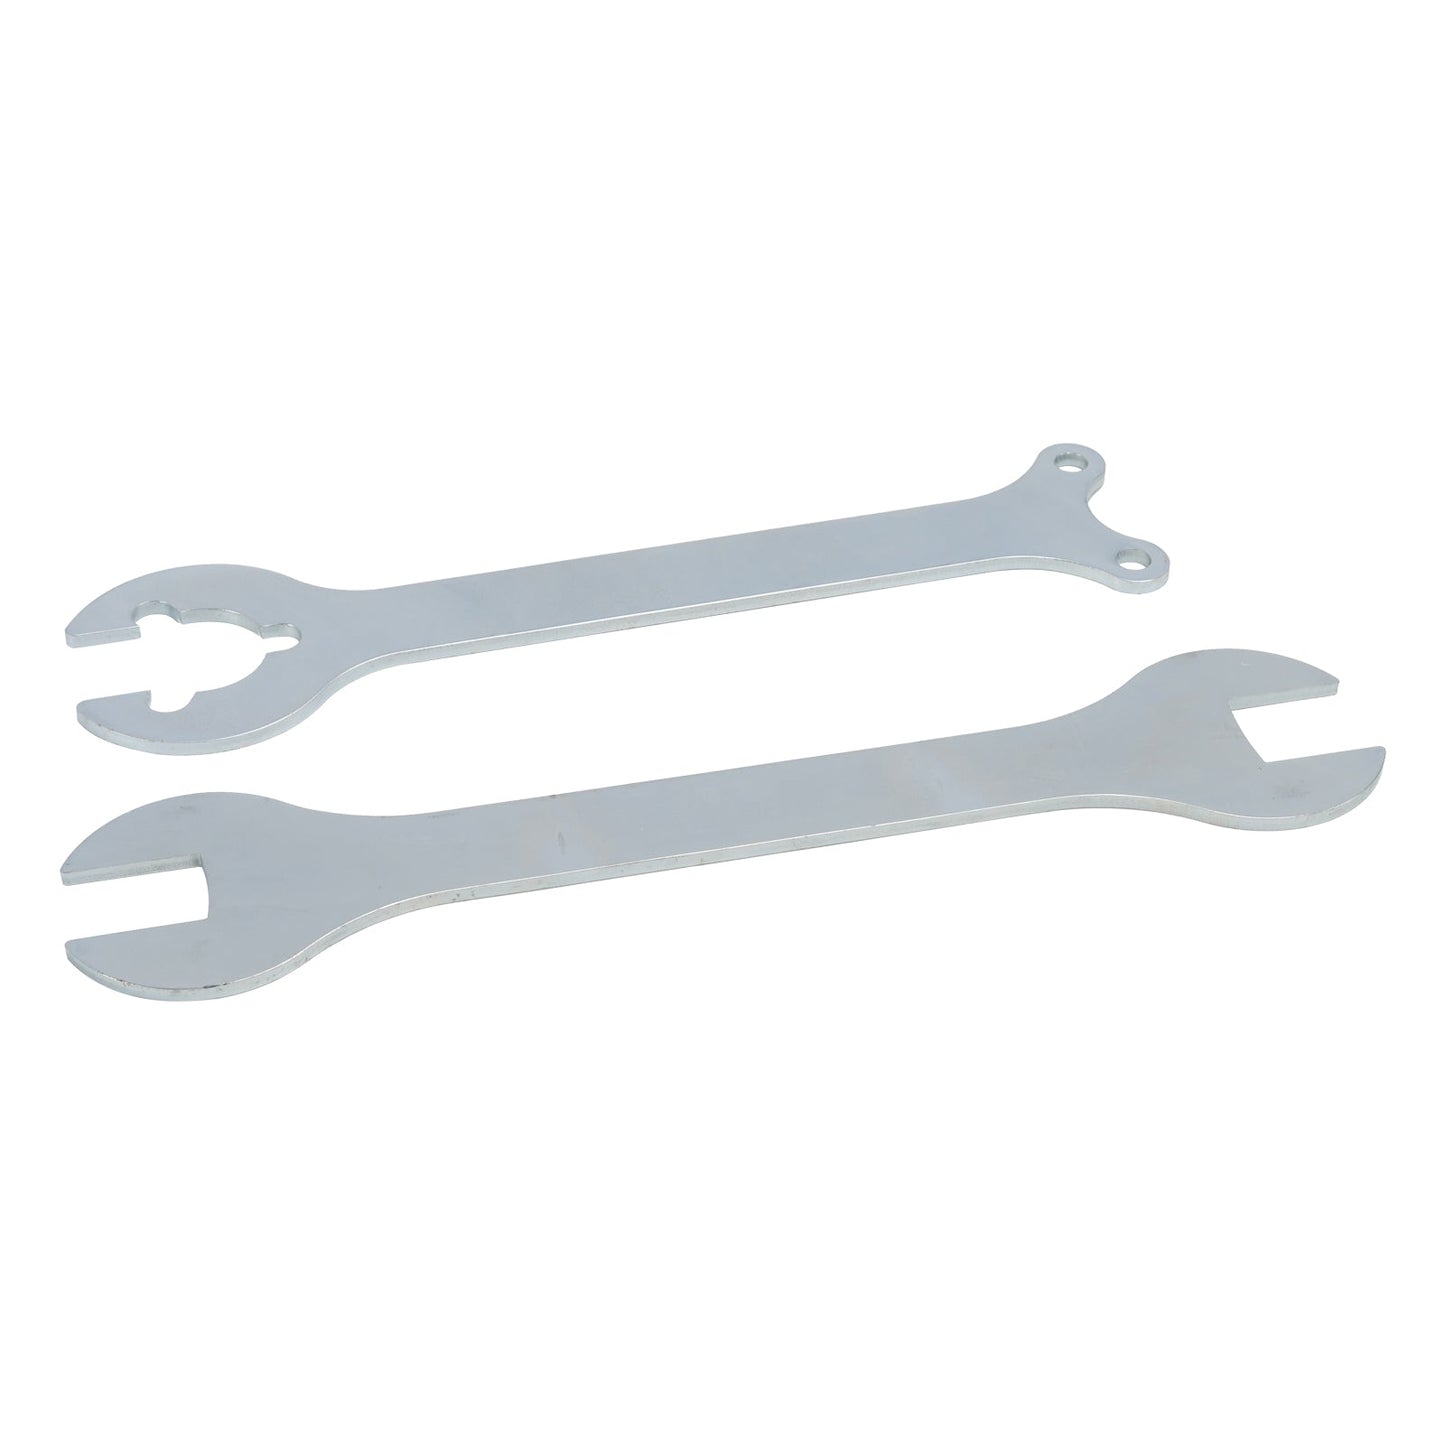 Land Rover Discovery 3 TD V6 Viscous Fan Tool Spanner